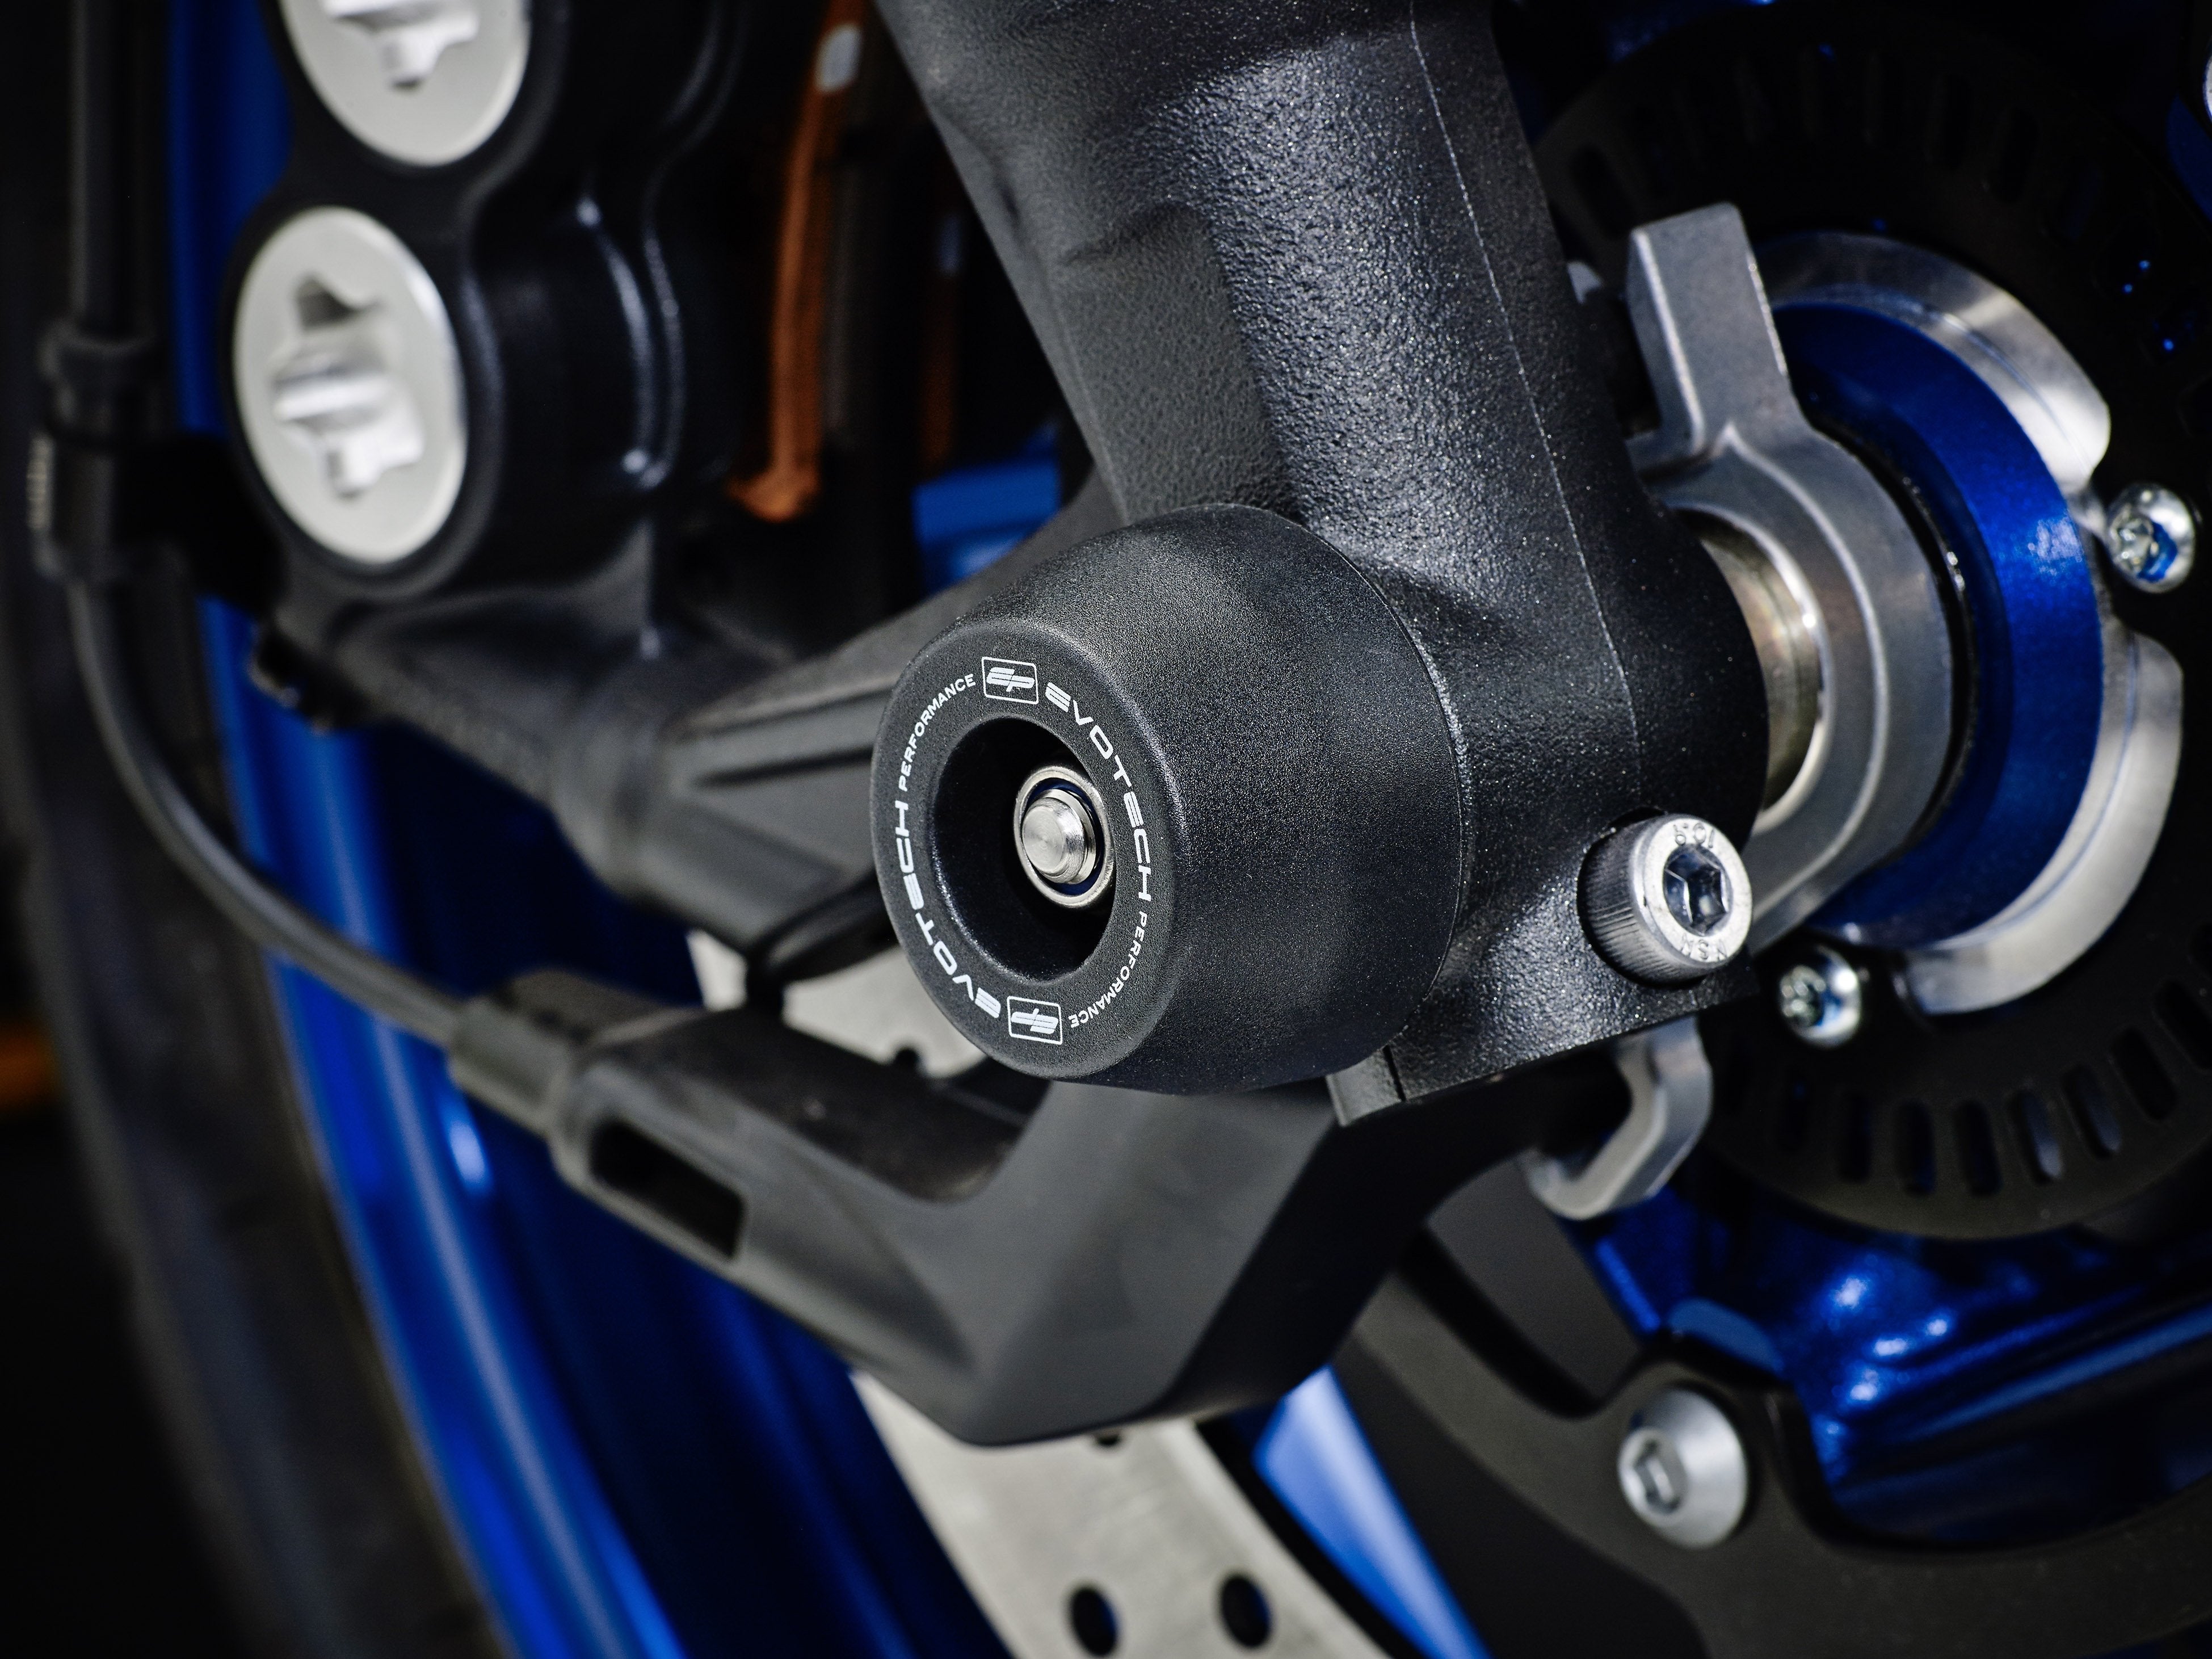 EP Spindle Bobbins Kit for the Yamaha MT-09 SP fitted to the front wheel, protecting the front forks and brake calipers.